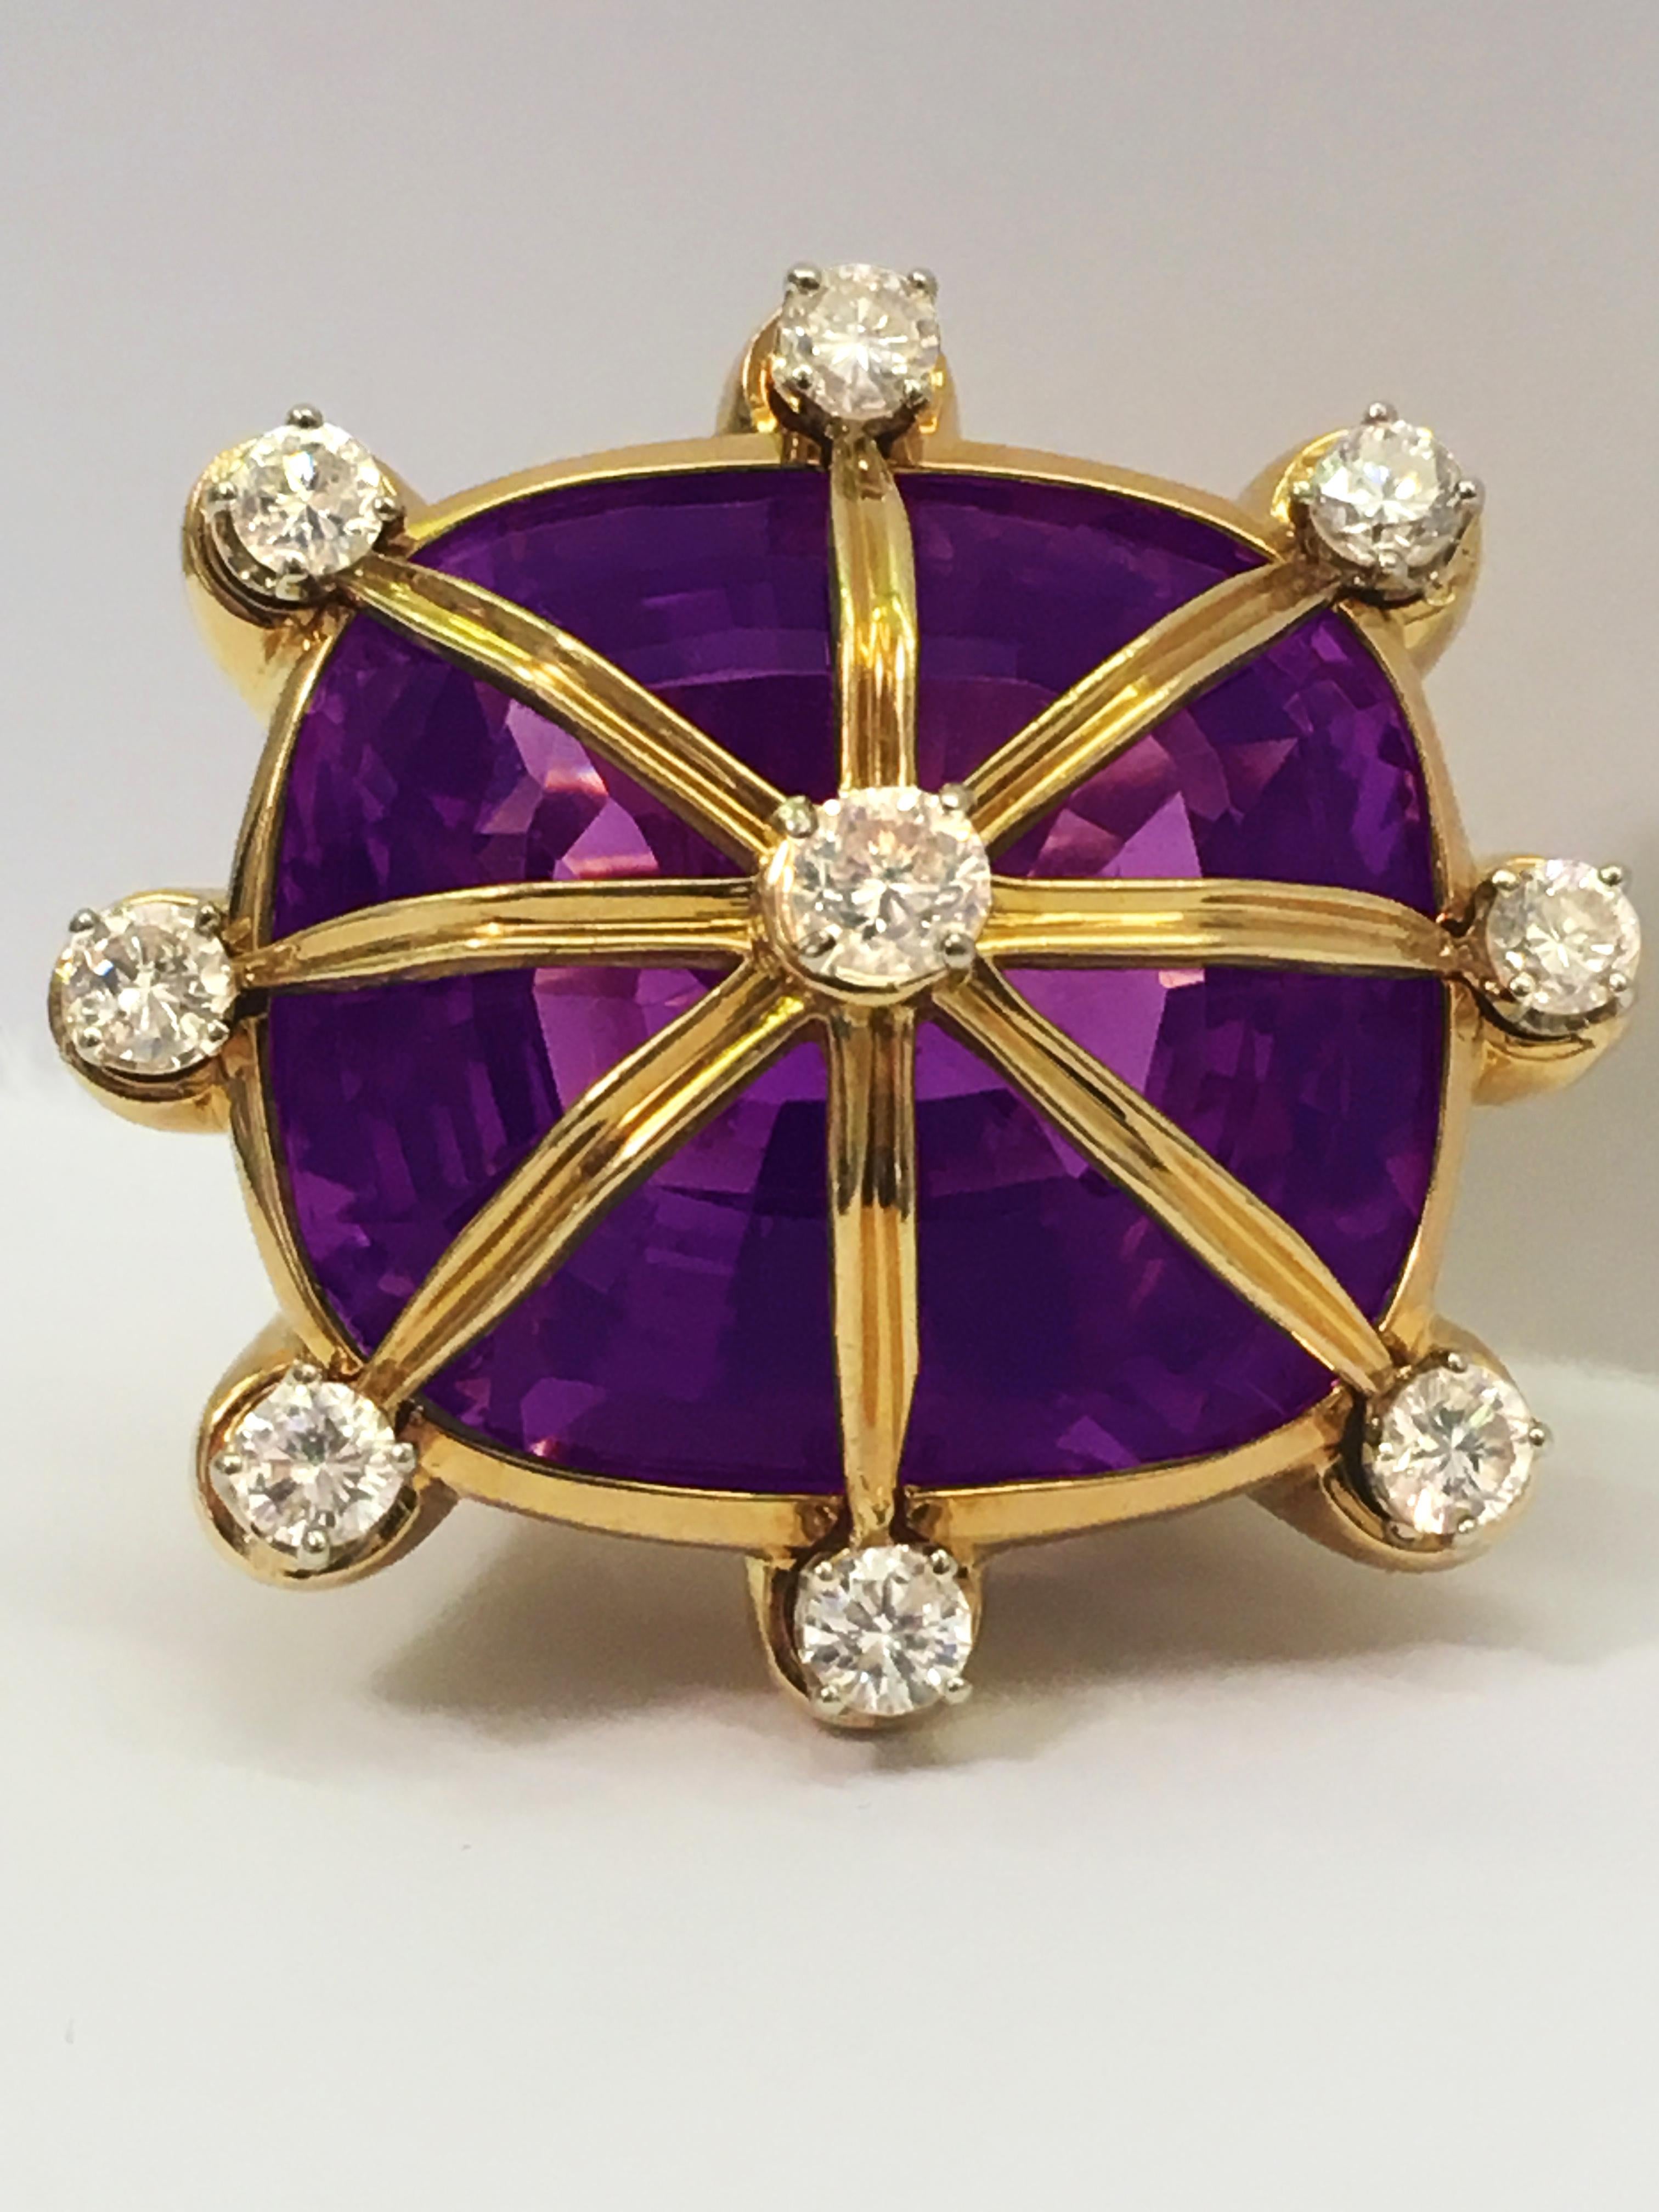 Cushion Cut Amethyst, Diamond and 18 Karat Gold Ring by Tony Duquette For Sale